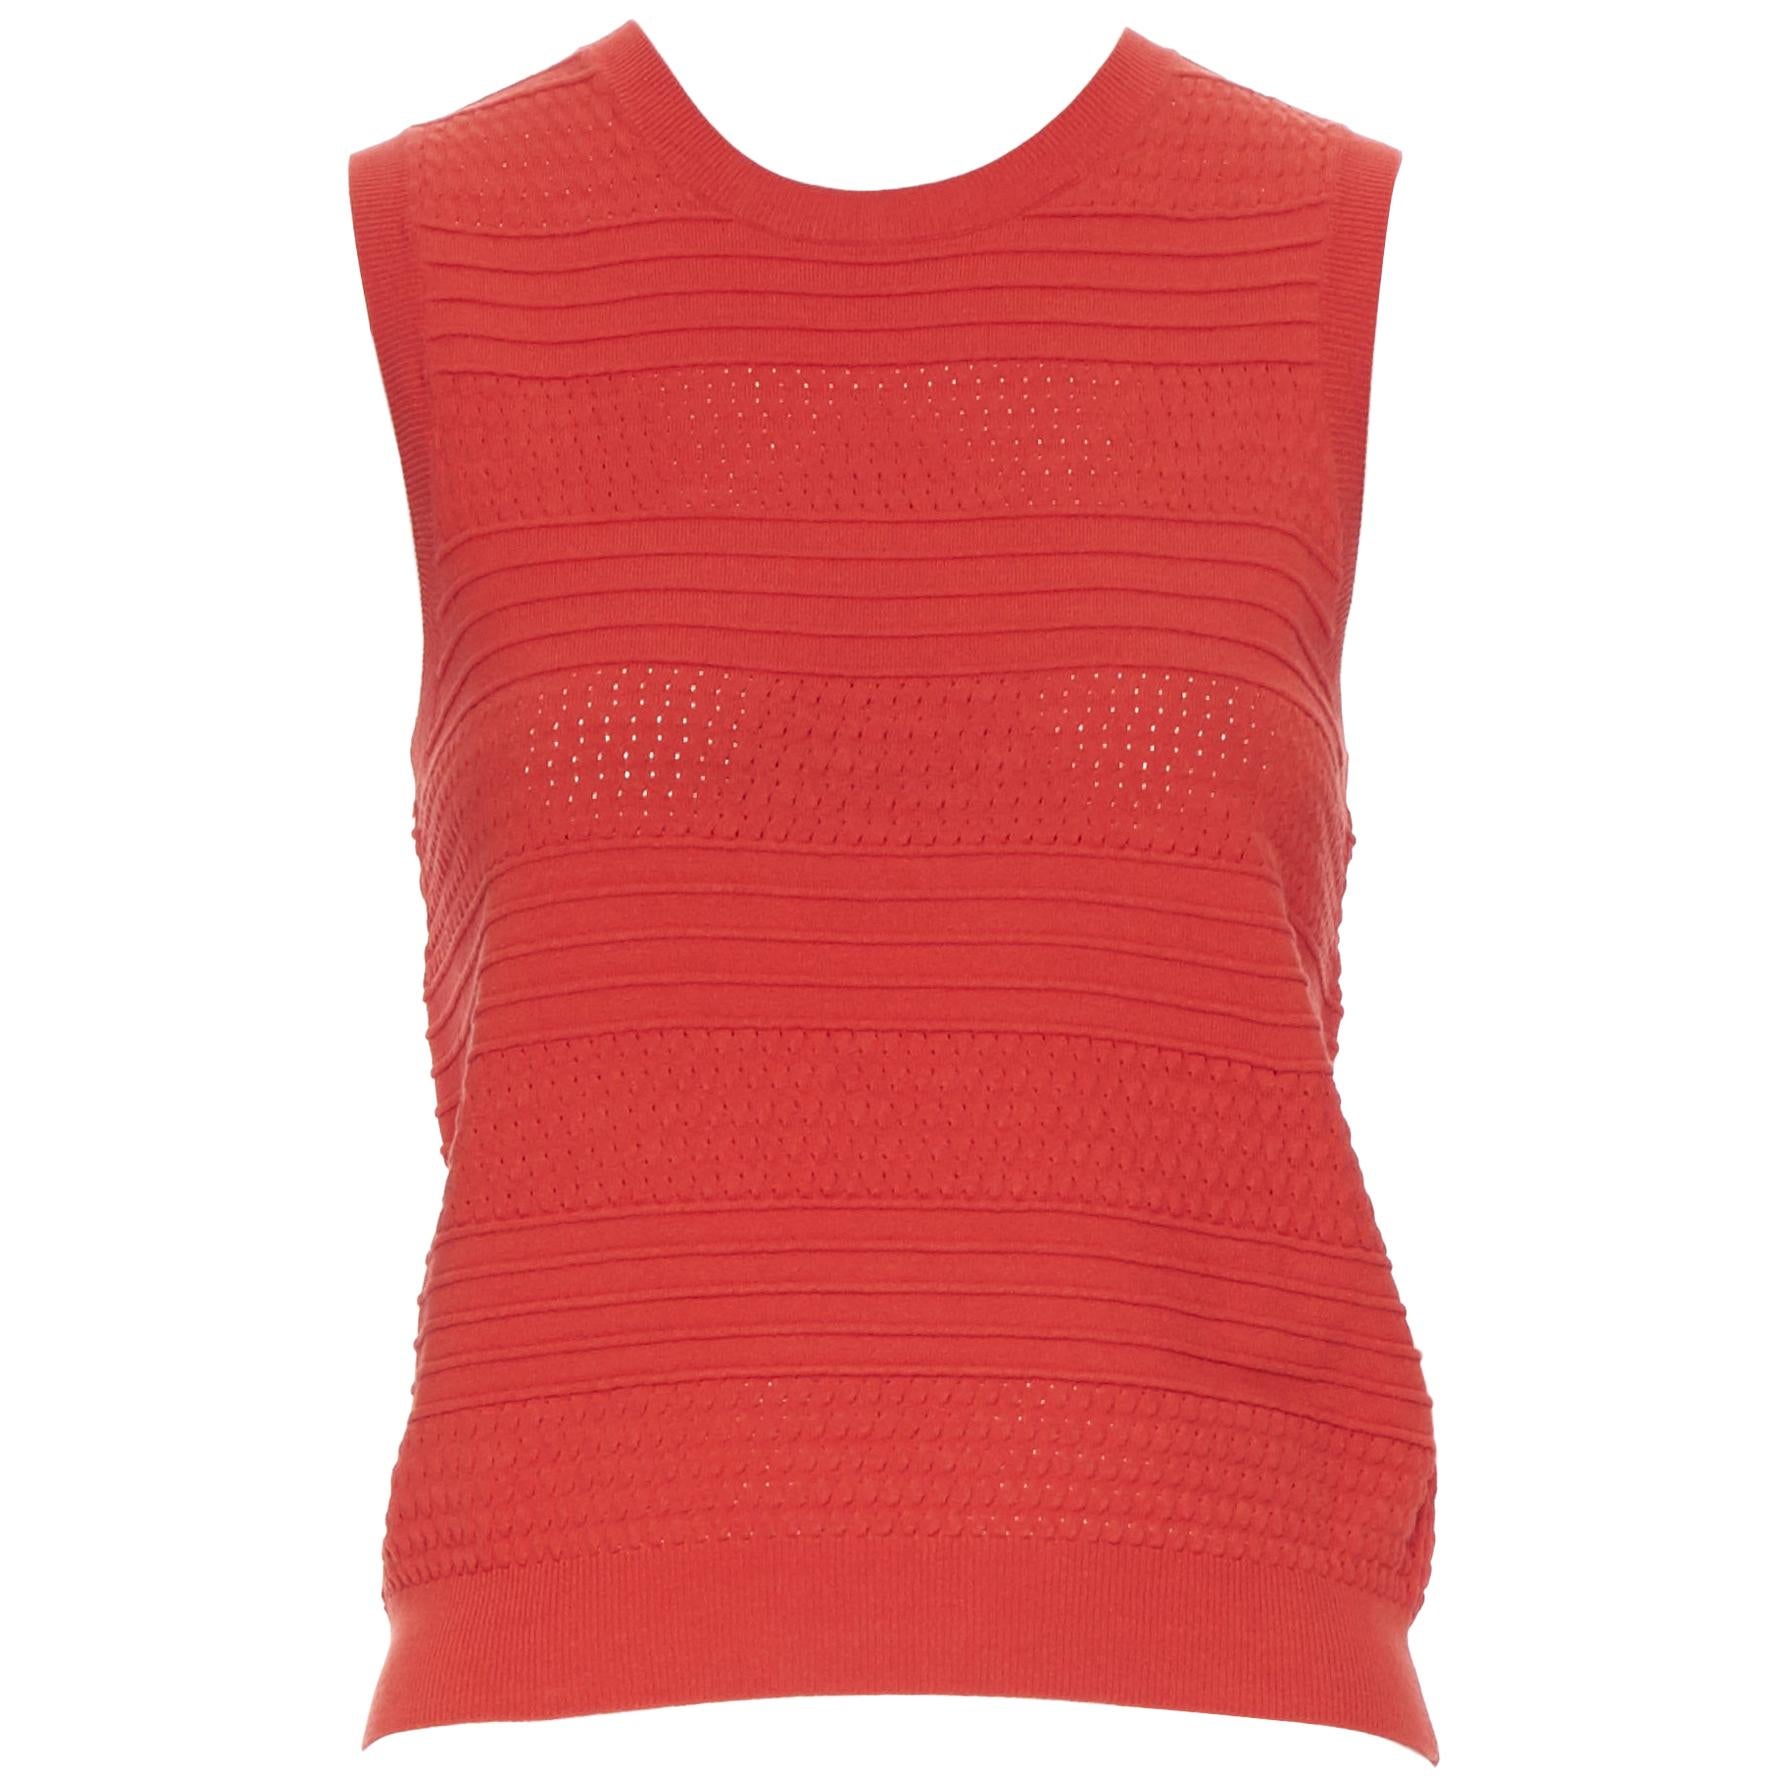 THEORY red polyester textured jacquard knit sleeveless vest top XS